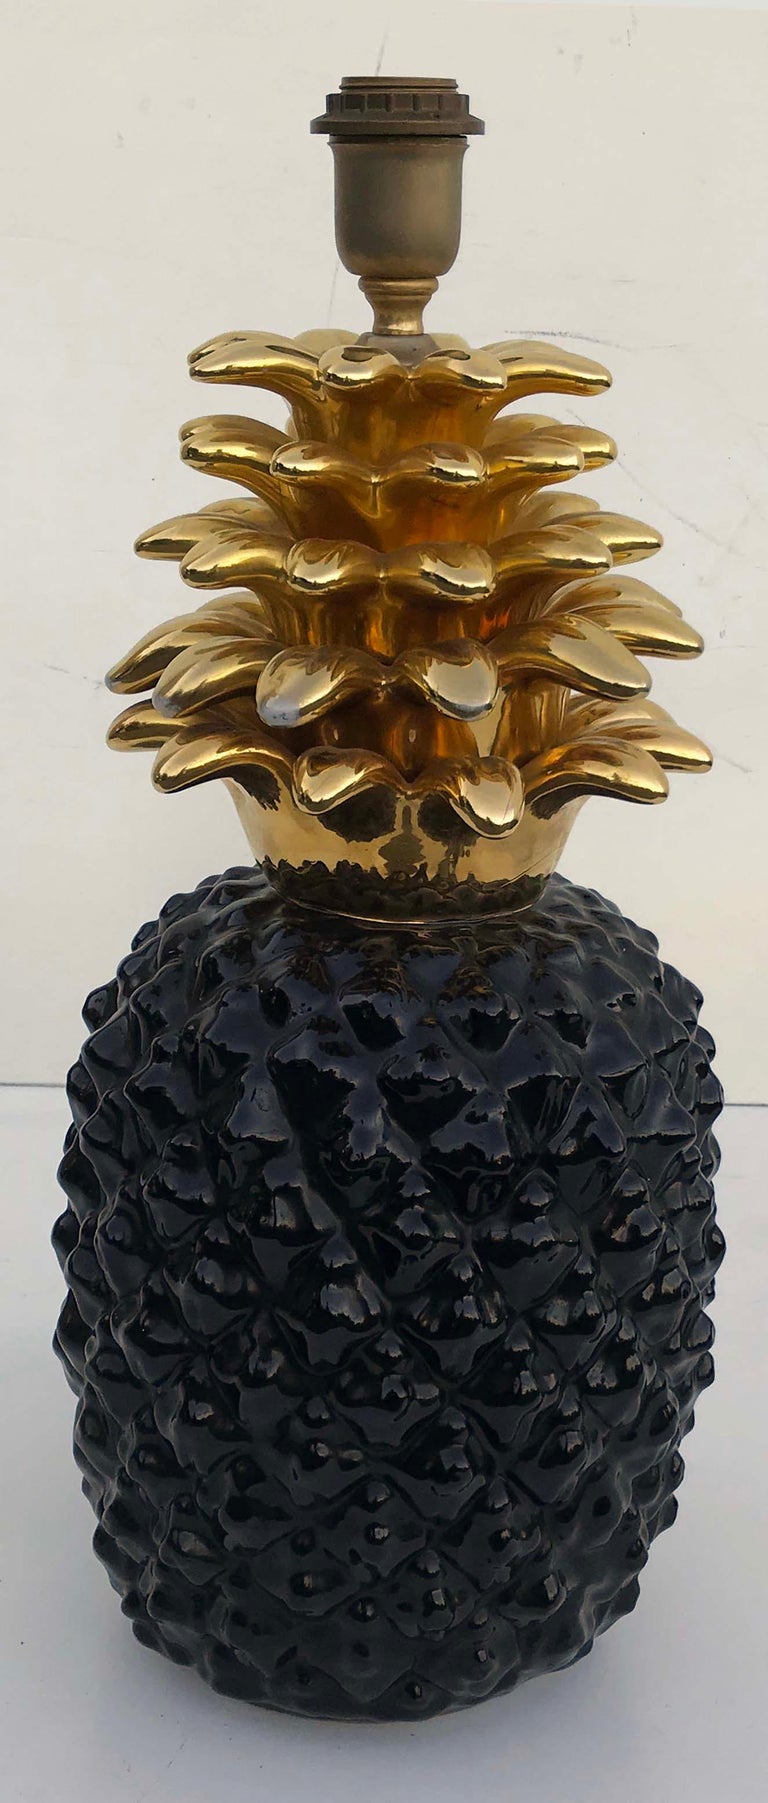 Superb Huge Maison Lancel Ceramic Lamp , Black And Gold Pineapple look.
1 light , 100 watts max bulb .
With shade : 40